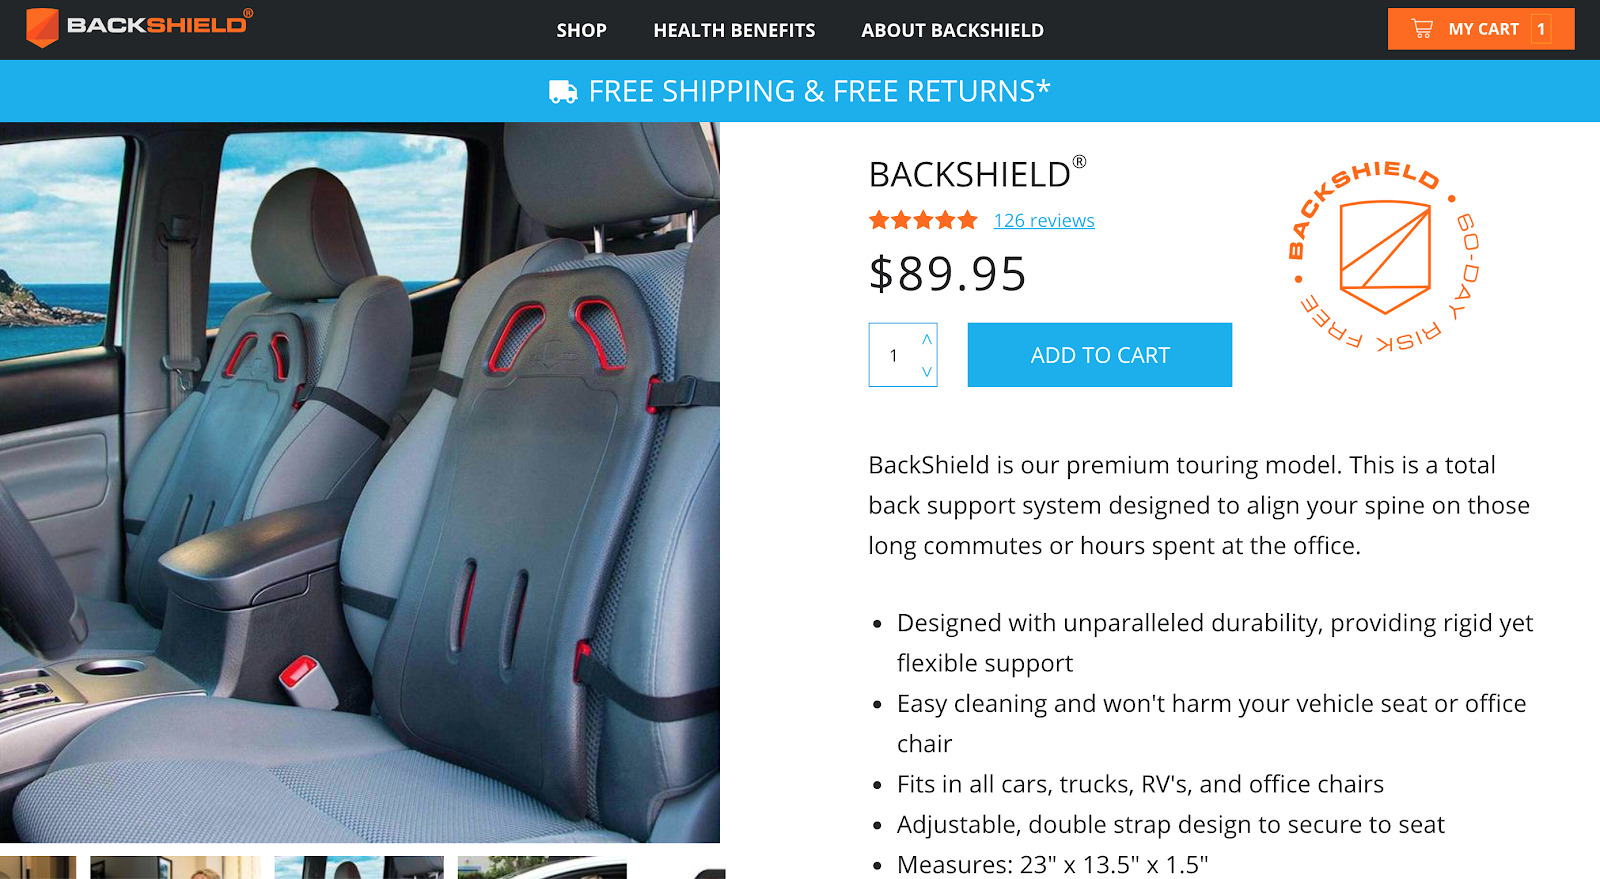 Best Lumbar Support For Car? An Uber Driver Reviews The BackShield